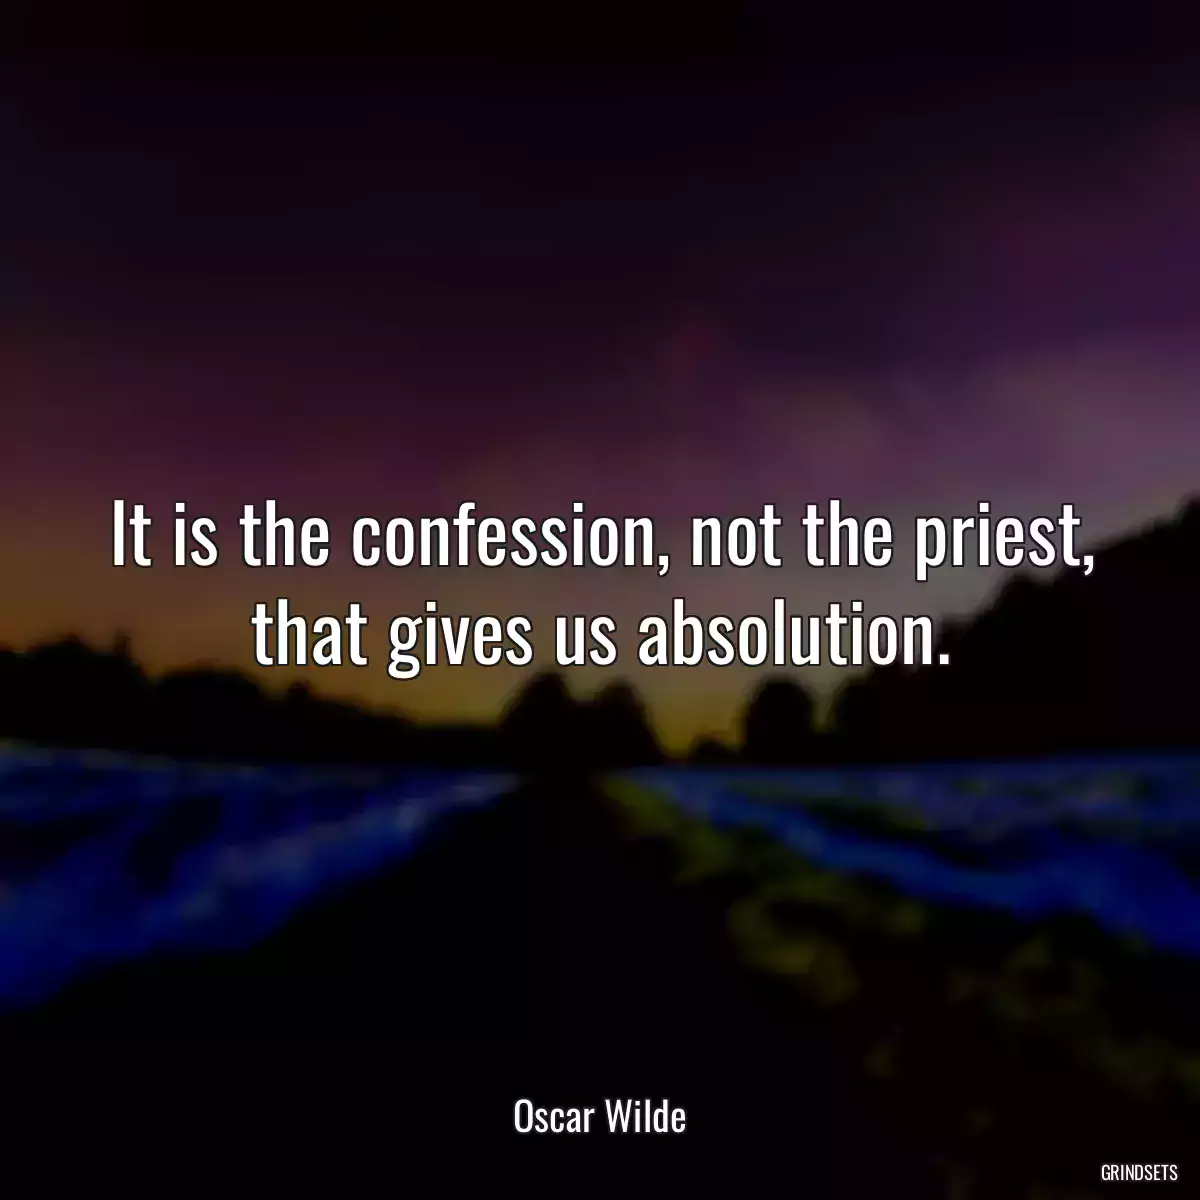 It is the confession, not the priest, that gives us absolution.